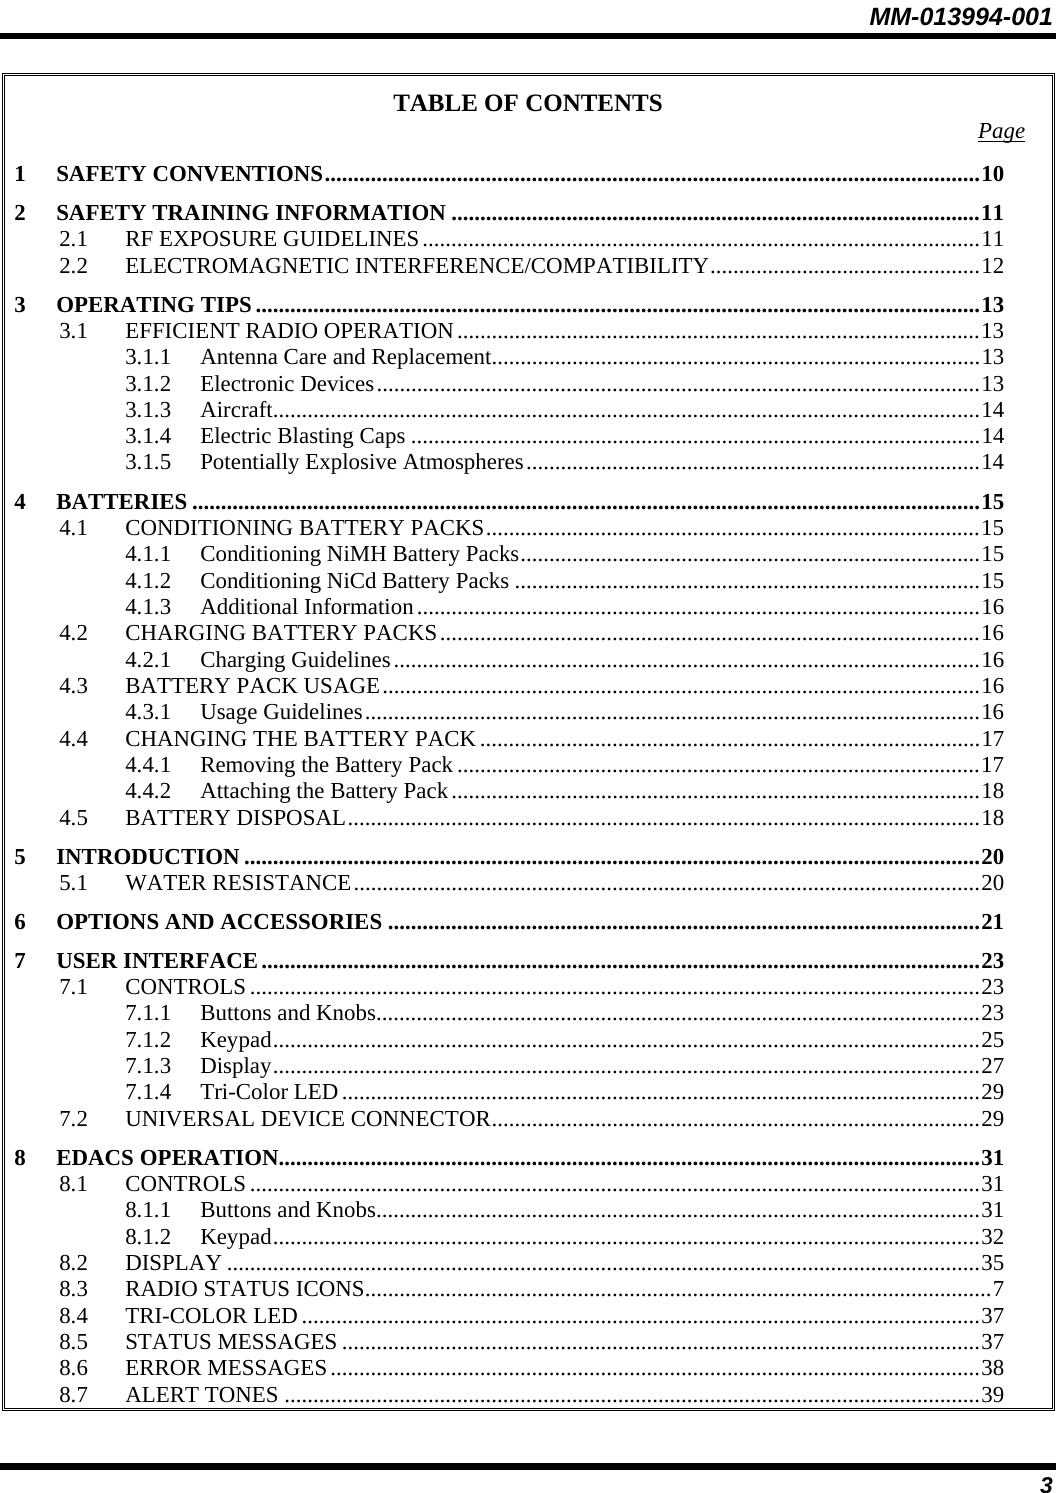 MM-013994-001 3 TABLE OF CONTENTS  Page 1 SAFETY CONVENTIONS..................................................................................................................10 2 SAFETY TRAINING INFORMATION ............................................................................................11 2.1 RF EXPOSURE GUIDELINES.................................................................................................11 2.2 ELECTROMAGNETIC INTERFERENCE/COMPATIBILITY...............................................12 3 OPERATING TIPS ..............................................................................................................................13 3.1 EFFICIENT RADIO OPERATION...........................................................................................13 3.1.1 Antenna Care and Replacement.....................................................................................13 3.1.2 Electronic Devices.........................................................................................................13 3.1.3 Aircraft...........................................................................................................................14 3.1.4 Electric Blasting Caps ...................................................................................................14 3.1.5 Potentially Explosive Atmospheres...............................................................................14 4 BATTERIES .........................................................................................................................................15 4.1 CONDITIONING BATTERY PACKS......................................................................................15 4.1.1 Conditioning NiMH Battery Packs................................................................................15 4.1.2 Conditioning NiCd Battery Packs .................................................................................15 4.1.3 Additional Information..................................................................................................16 4.2 CHARGING BATTERY PACKS..............................................................................................16 4.2.1 Charging Guidelines......................................................................................................16 4.3 BATTERY PACK USAGE........................................................................................................16 4.3.1 Usage Guidelines...........................................................................................................16 4.4 CHANGING THE BATTERY PACK .......................................................................................17 4.4.1 Removing the Battery Pack ...........................................................................................17 4.4.2 Attaching the Battery Pack............................................................................................18 4.5 BATTERY DISPOSAL..............................................................................................................18 5 INTRODUCTION ................................................................................................................................20 5.1 WATER RESISTANCE.............................................................................................................20 6 OPTIONS AND ACCESSORIES .......................................................................................................21 7 USER INTERFACE.............................................................................................................................23 7.1 CONTROLS...............................................................................................................................23 7.1.1 Buttons and Knobs.........................................................................................................23 7.1.2 Keypad...........................................................................................................................25 7.1.3 Display...........................................................................................................................27 7.1.4 Tri-Color LED...............................................................................................................29 7.2 UNIVERSAL DEVICE CONNECTOR.....................................................................................29 8 EDACS OPERATION..........................................................................................................................31 8.1 CONTROLS...............................................................................................................................31 8.1.1 Buttons and Knobs.........................................................................................................31 8.1.2 Keypad...........................................................................................................................32 8.2 DISPLAY ...................................................................................................................................35 8.3 RADIO STATUS ICONS.............................................................................................................7 8.4 TRI-COLOR LED......................................................................................................................37 8.5 STATUS MESSAGES ...............................................................................................................37 8.6 ERROR MESSAGES.................................................................................................................38 8.7 ALERT TONES .........................................................................................................................39 